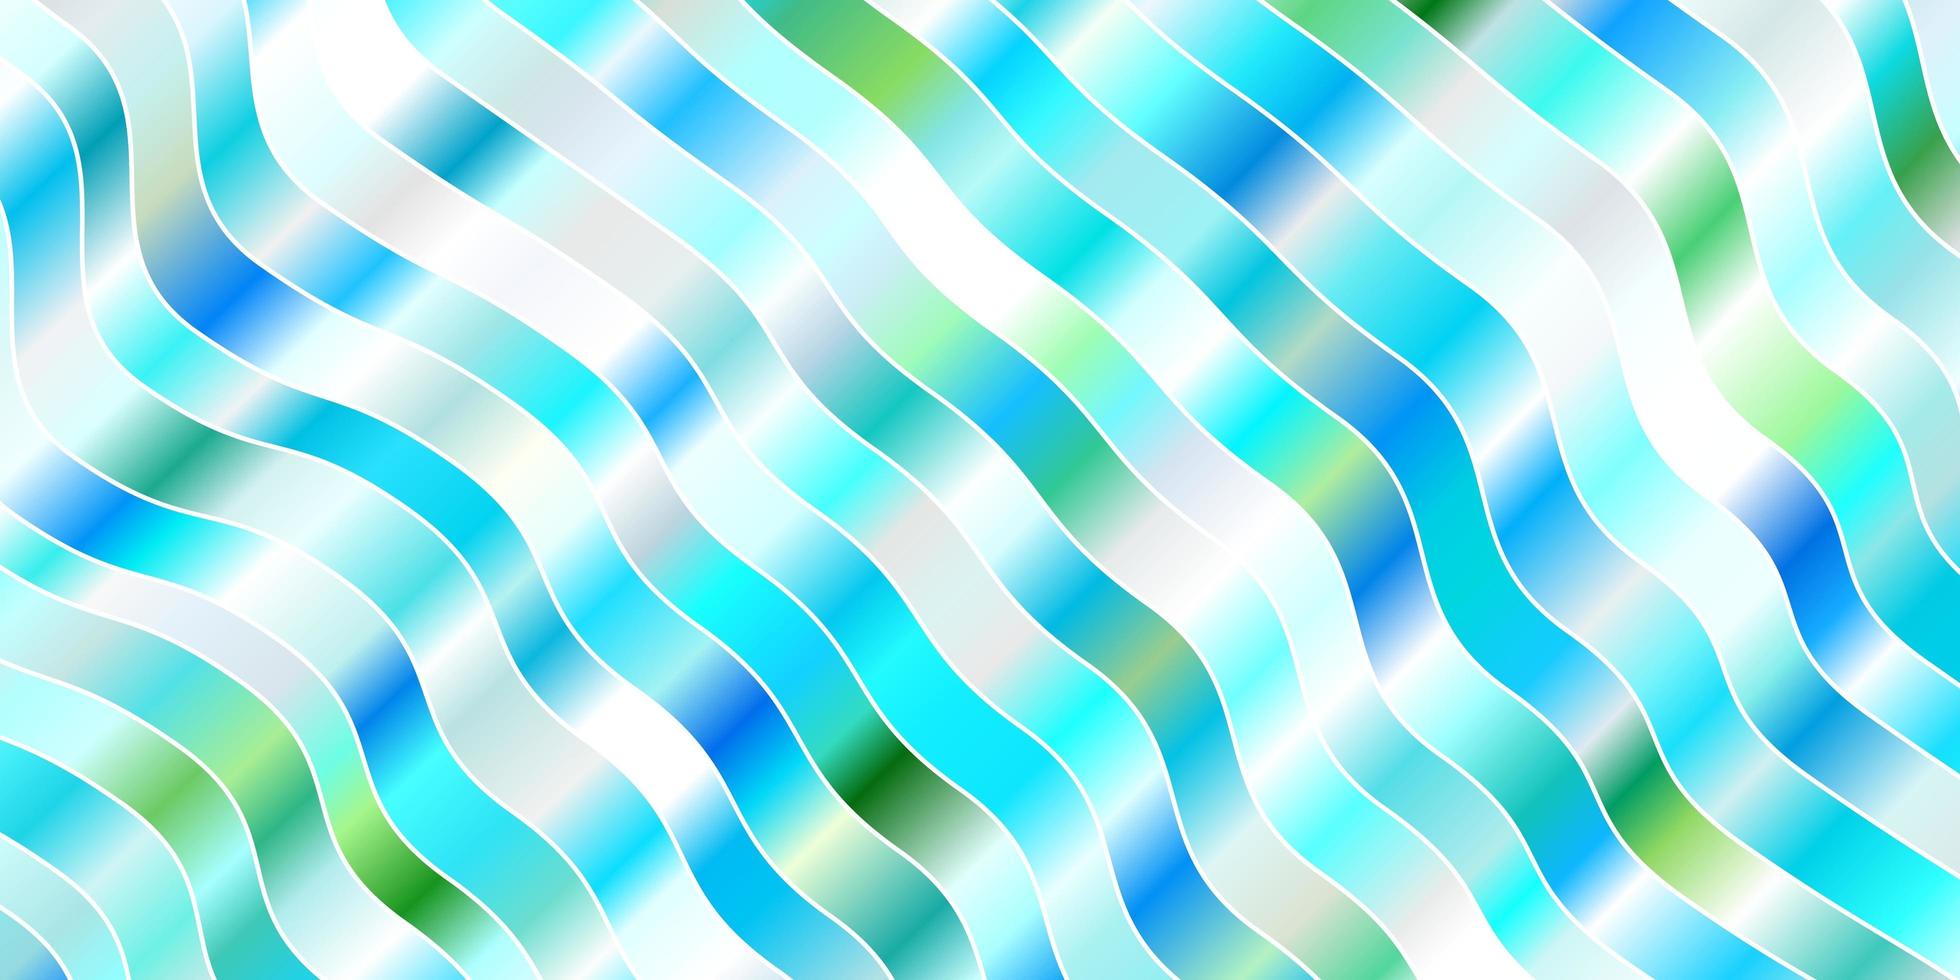 Light Blue Green vector pattern with wry lines Colorful abstract illustration with gradient curves Template for your UI design